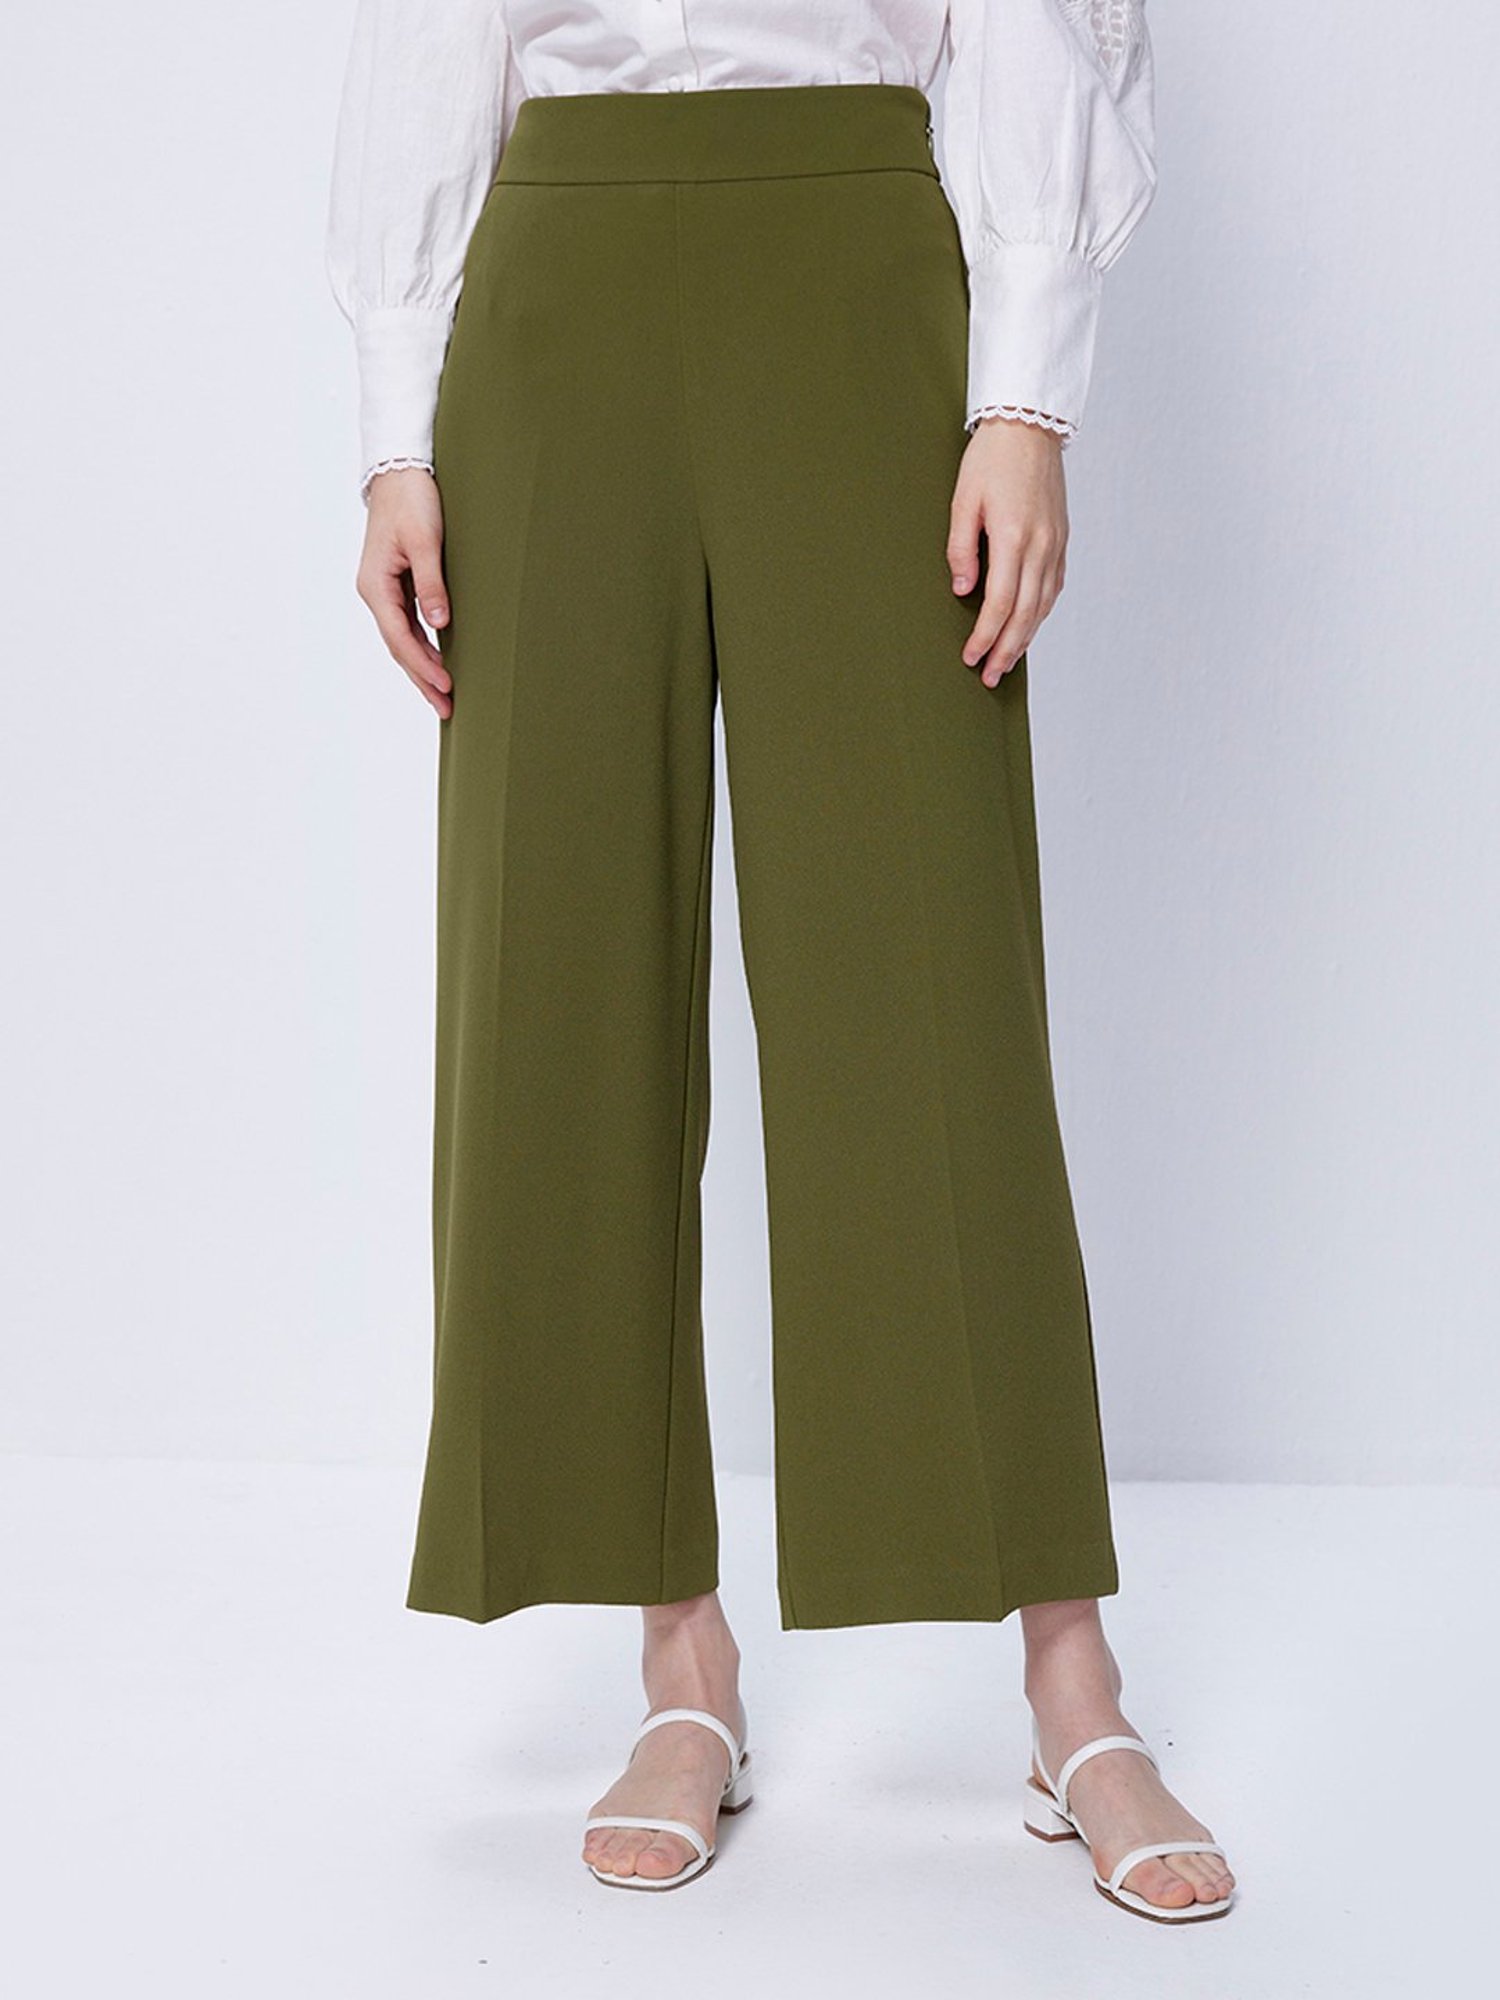 AAITHAN Men's Solid Olive Trousers